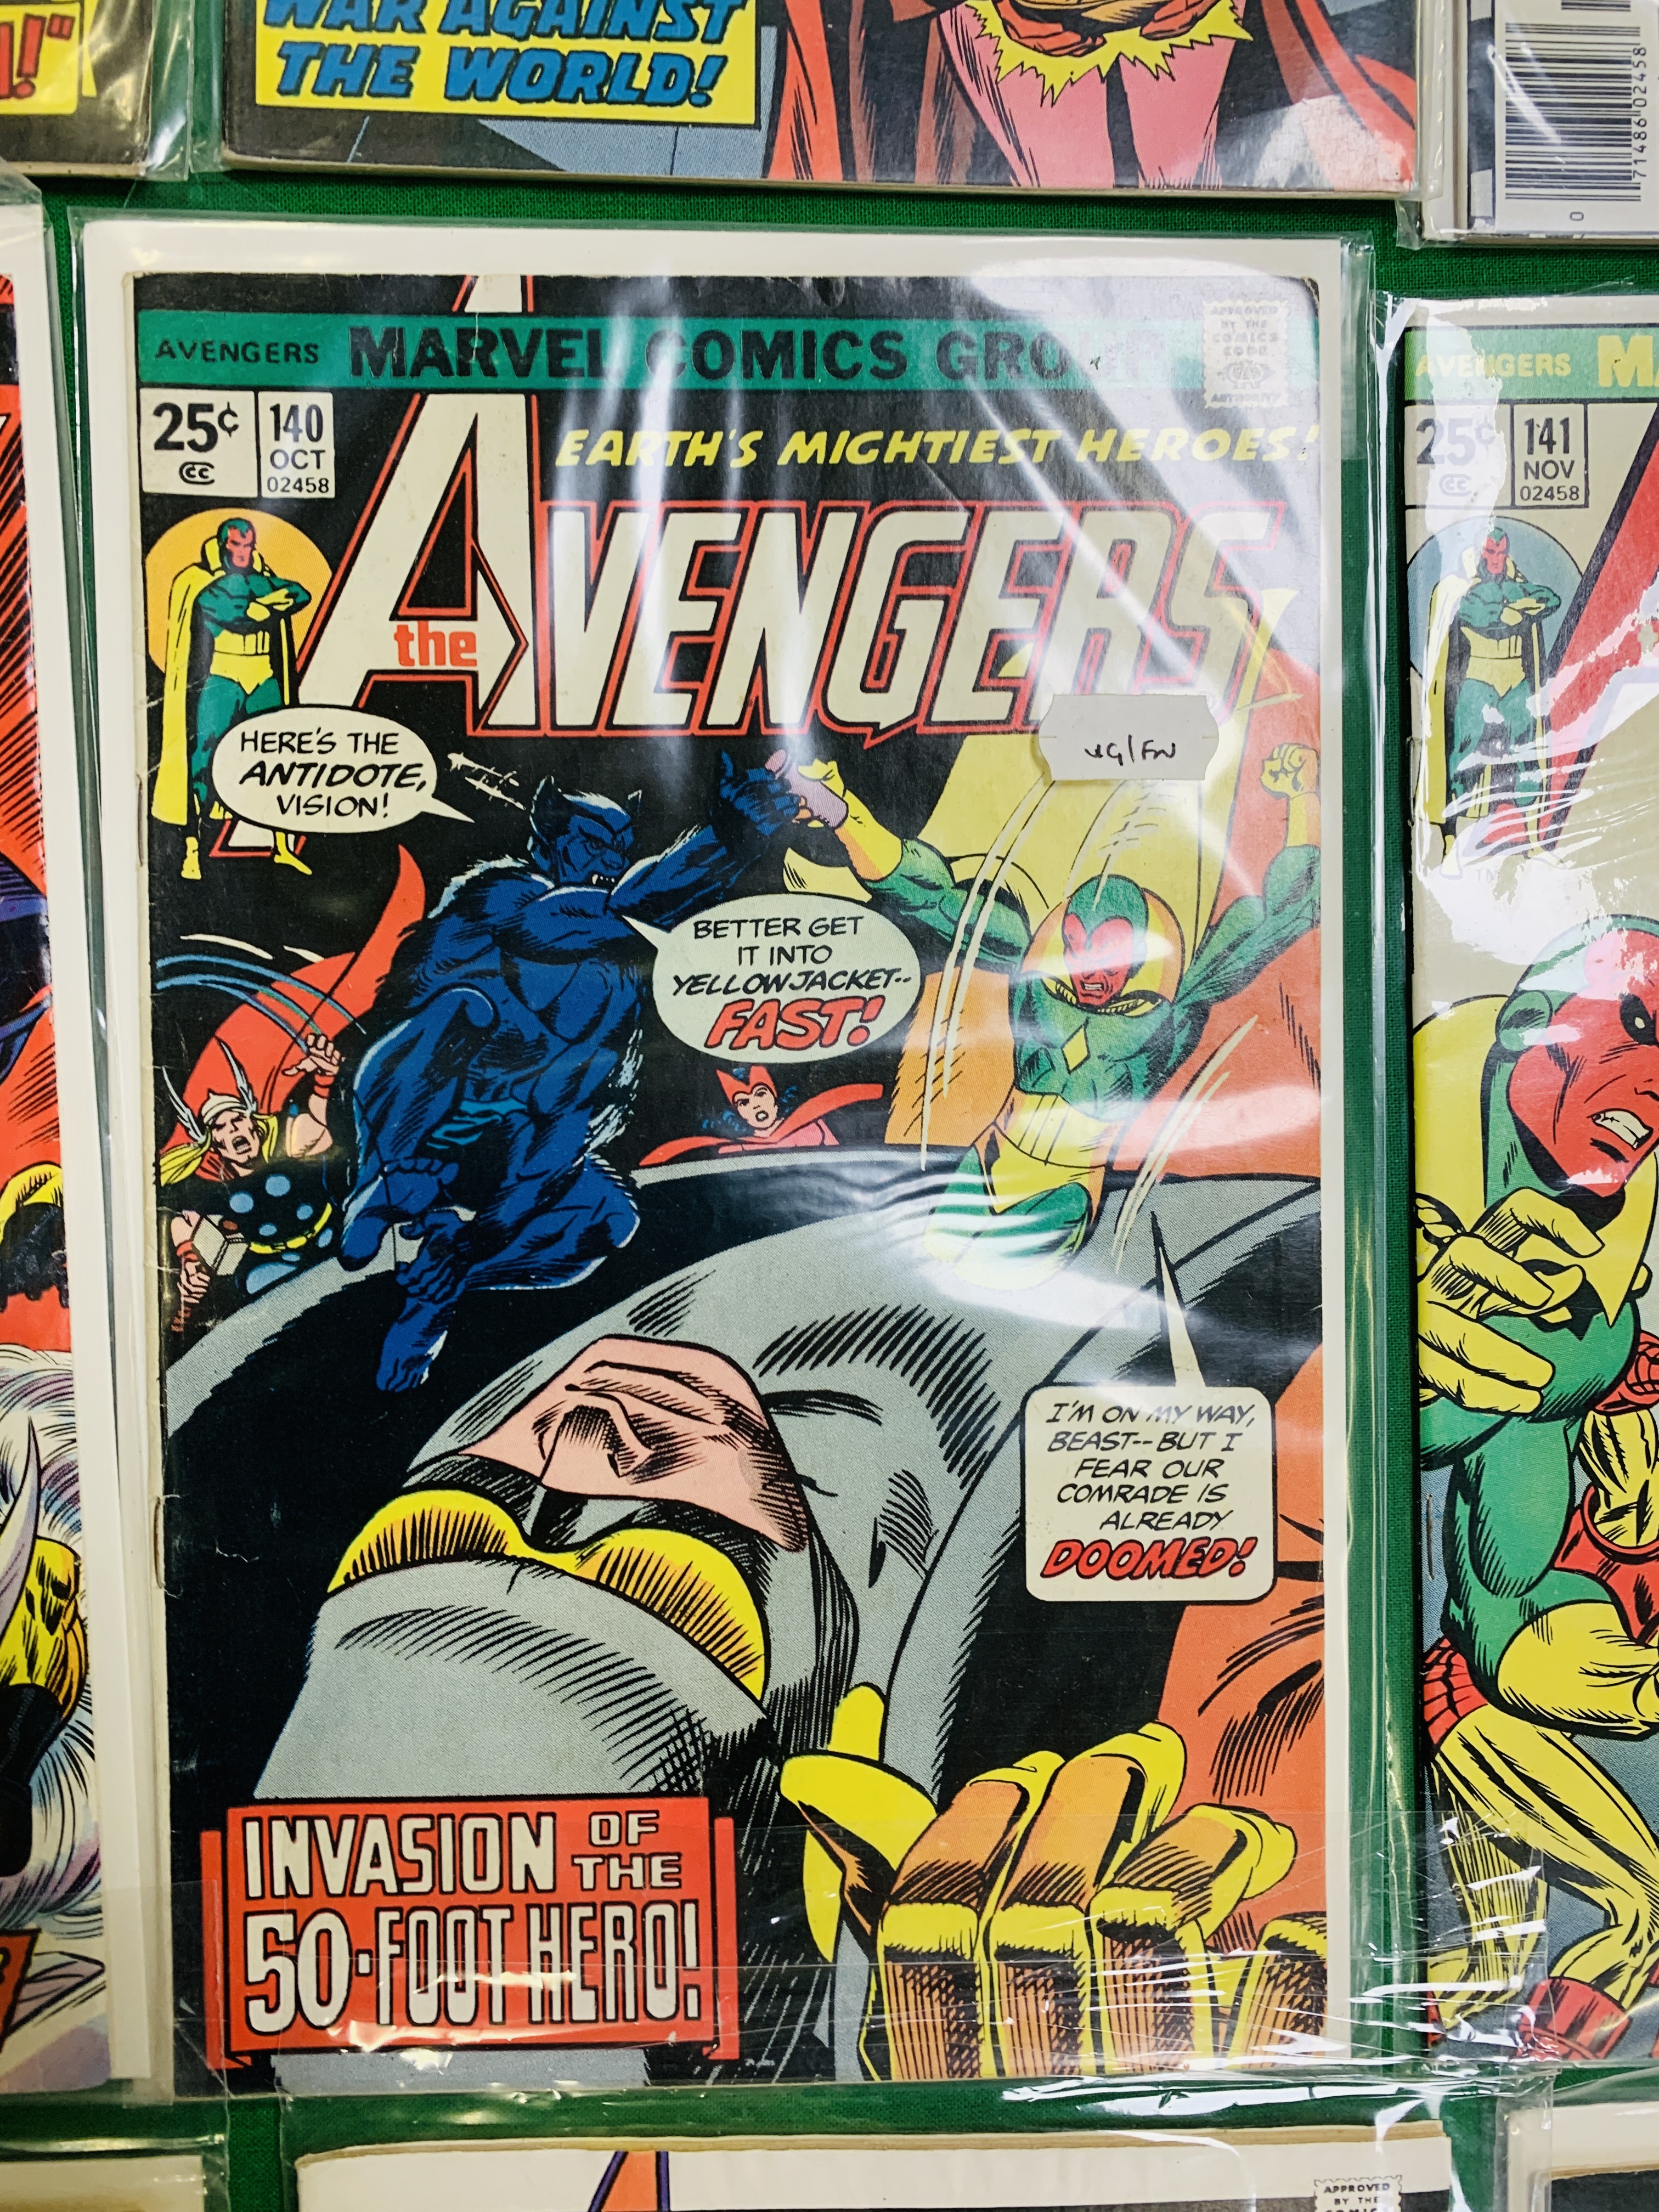 MARVEL COMICS THE AVENGERS NO. 101 - 299, MISSING ISSUES 103 AND 110. - Image 26 of 130